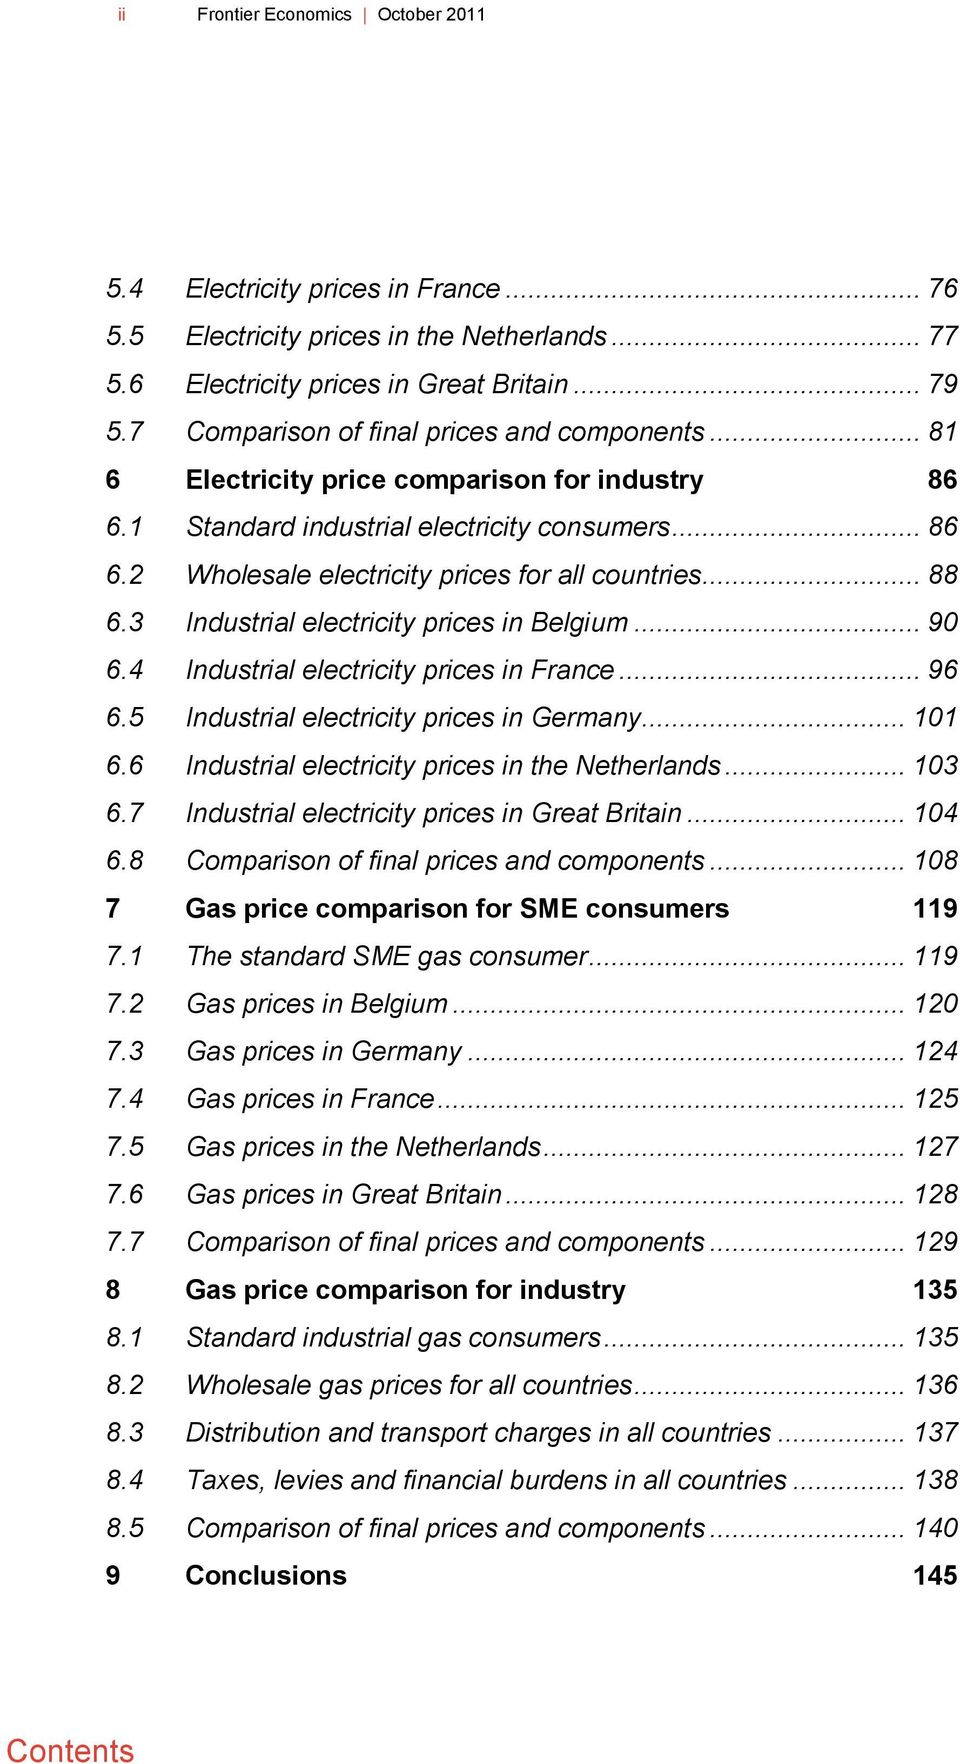 .. 88 6.3 Industrial electricity prices in Belgium... 90 6.4 Industrial electricity prices in France... 96 6.5 Industrial electricity prices in Germany... 101 6.